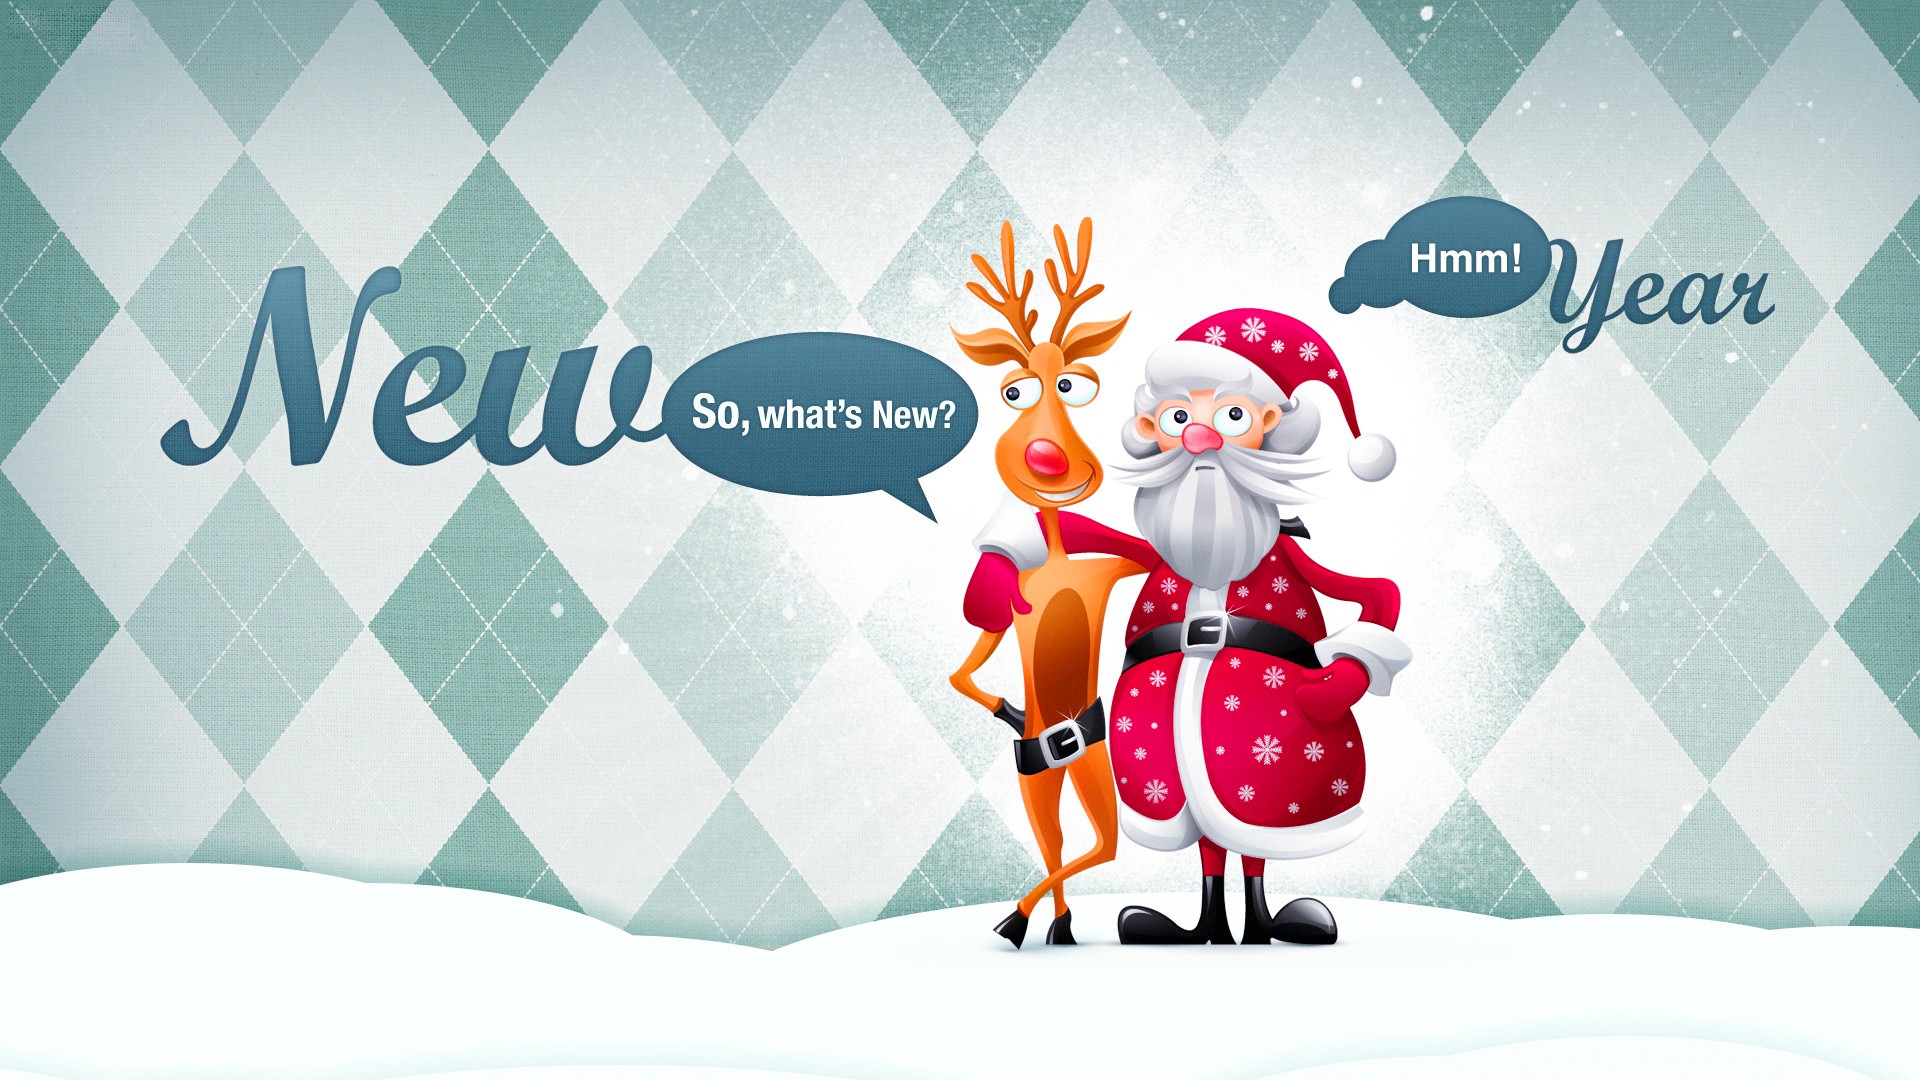 Santa New Year 2016 Wishes Wallpaper   New HD Wallpapers